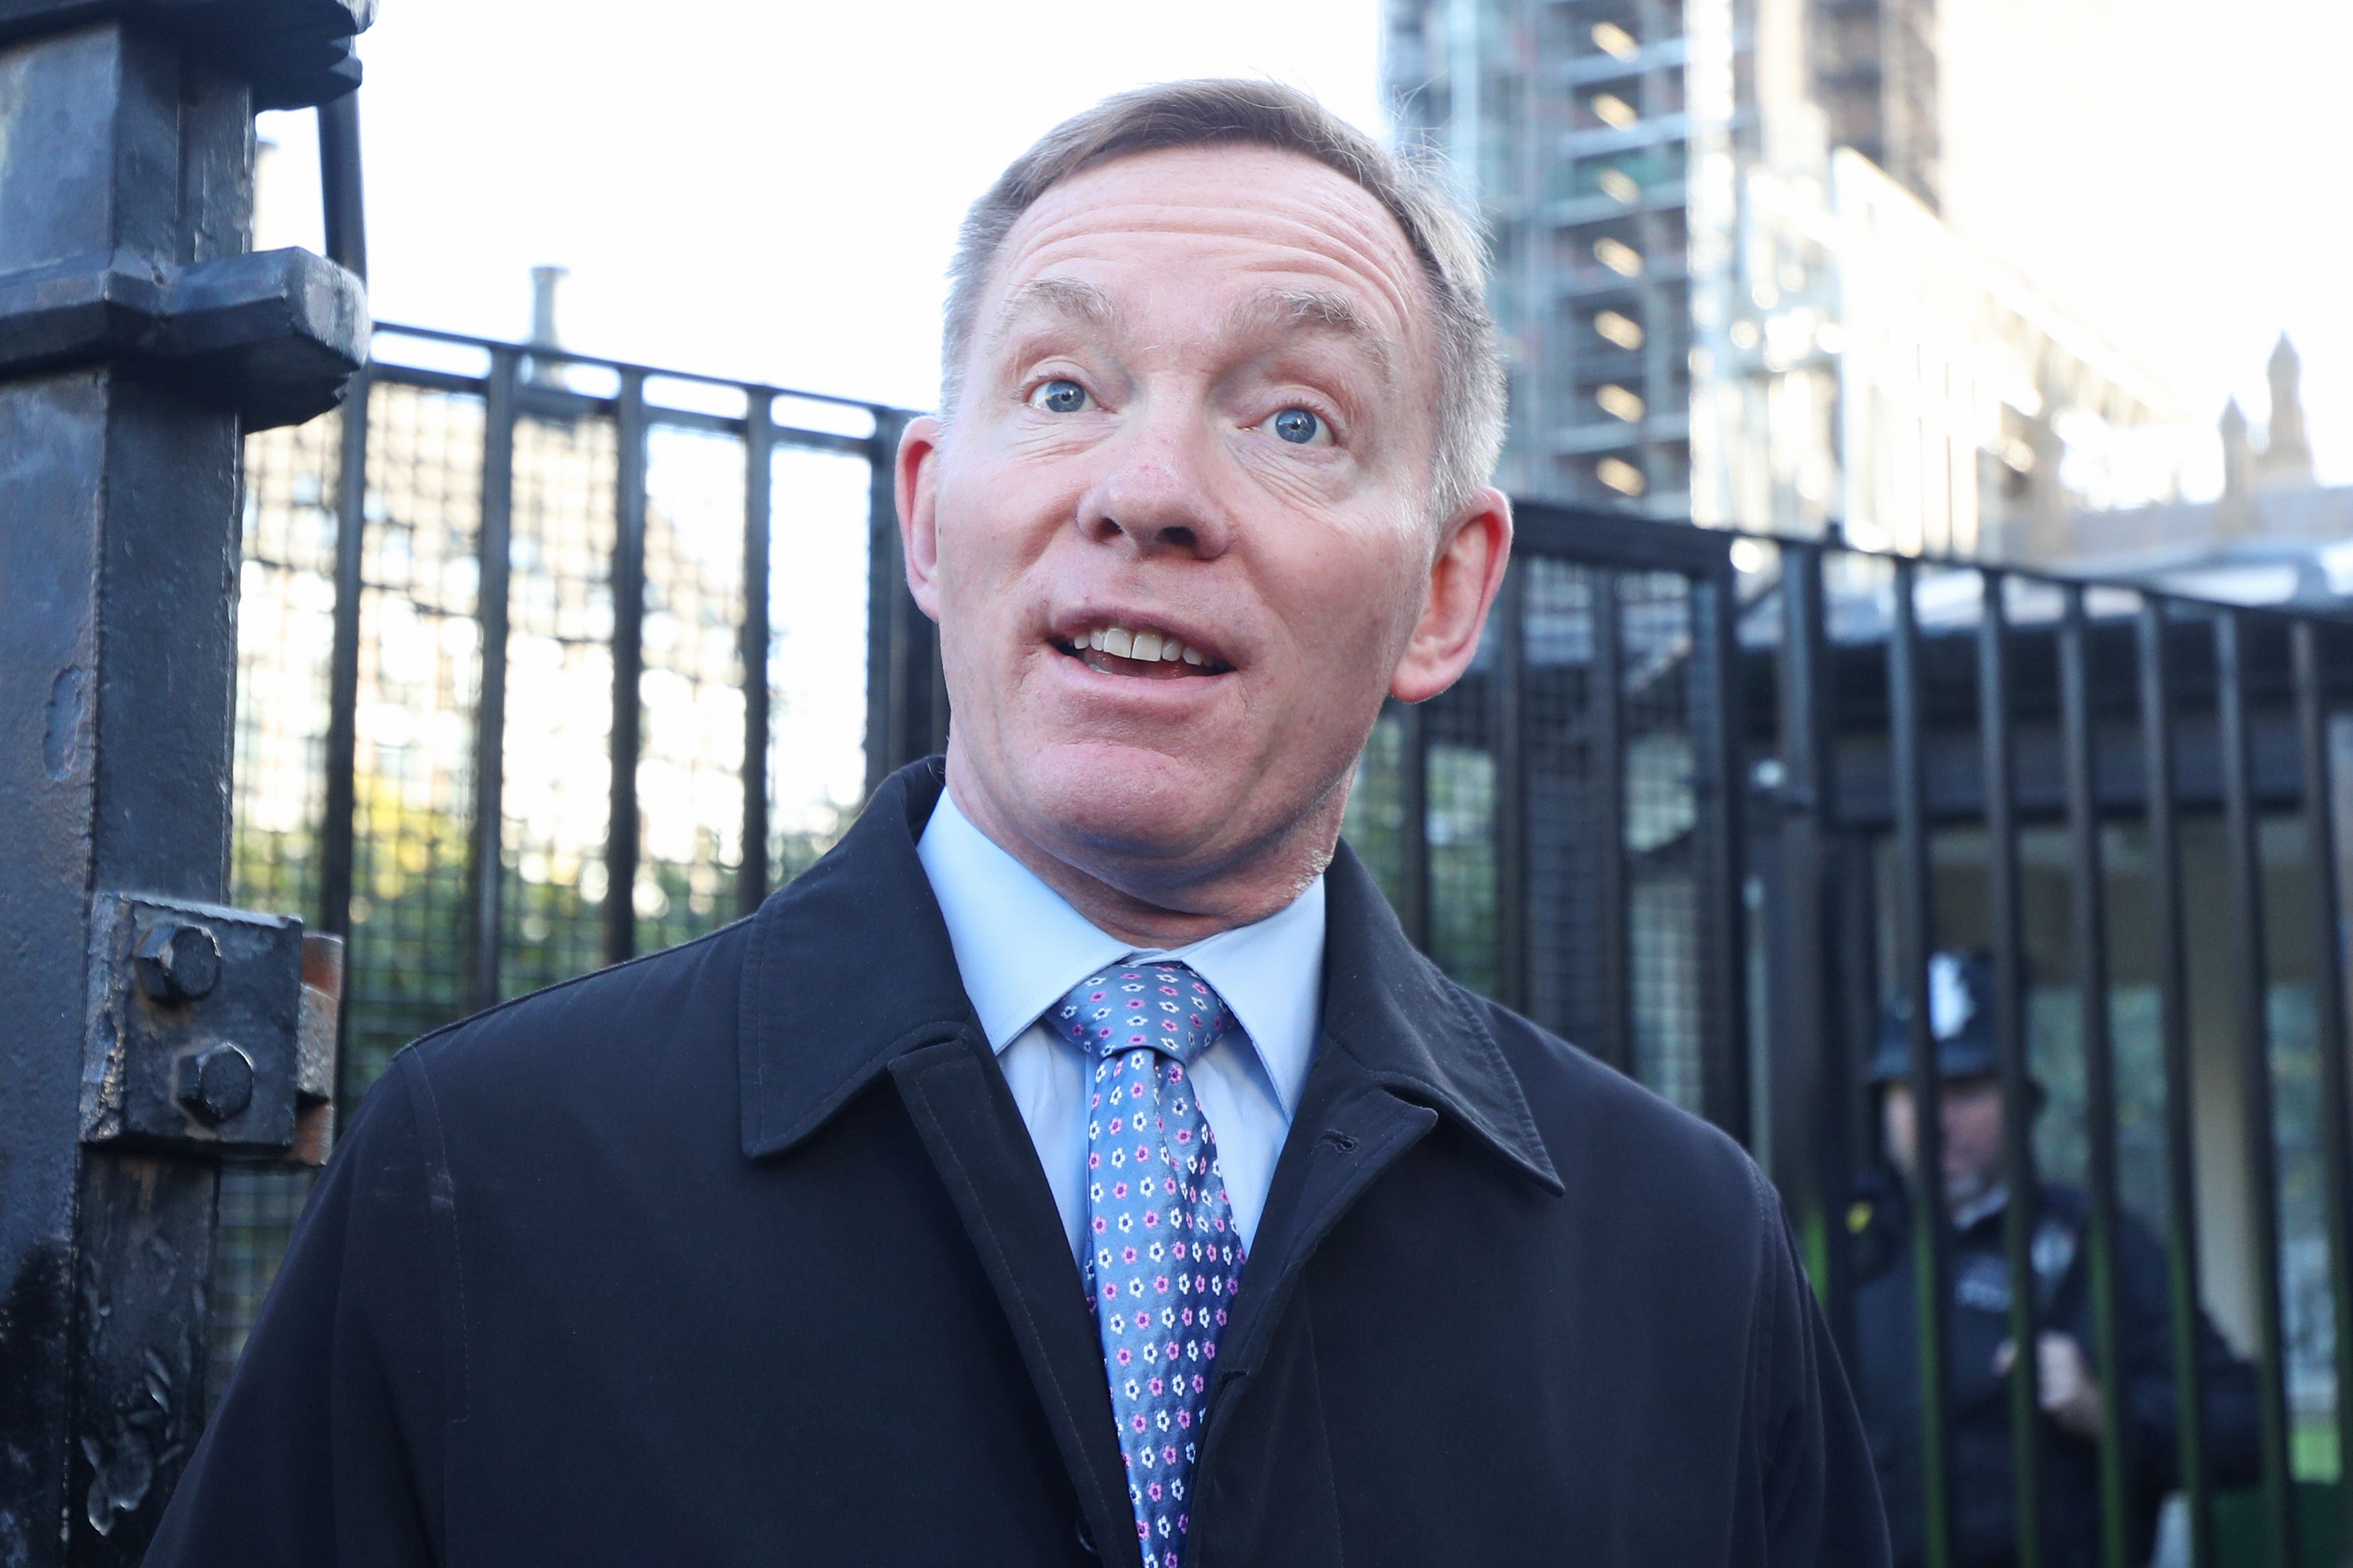 Labour MP Chris Bryant said members of the public cannot claim fines on their daily expenses, adding that MPs should not ‘be any different’